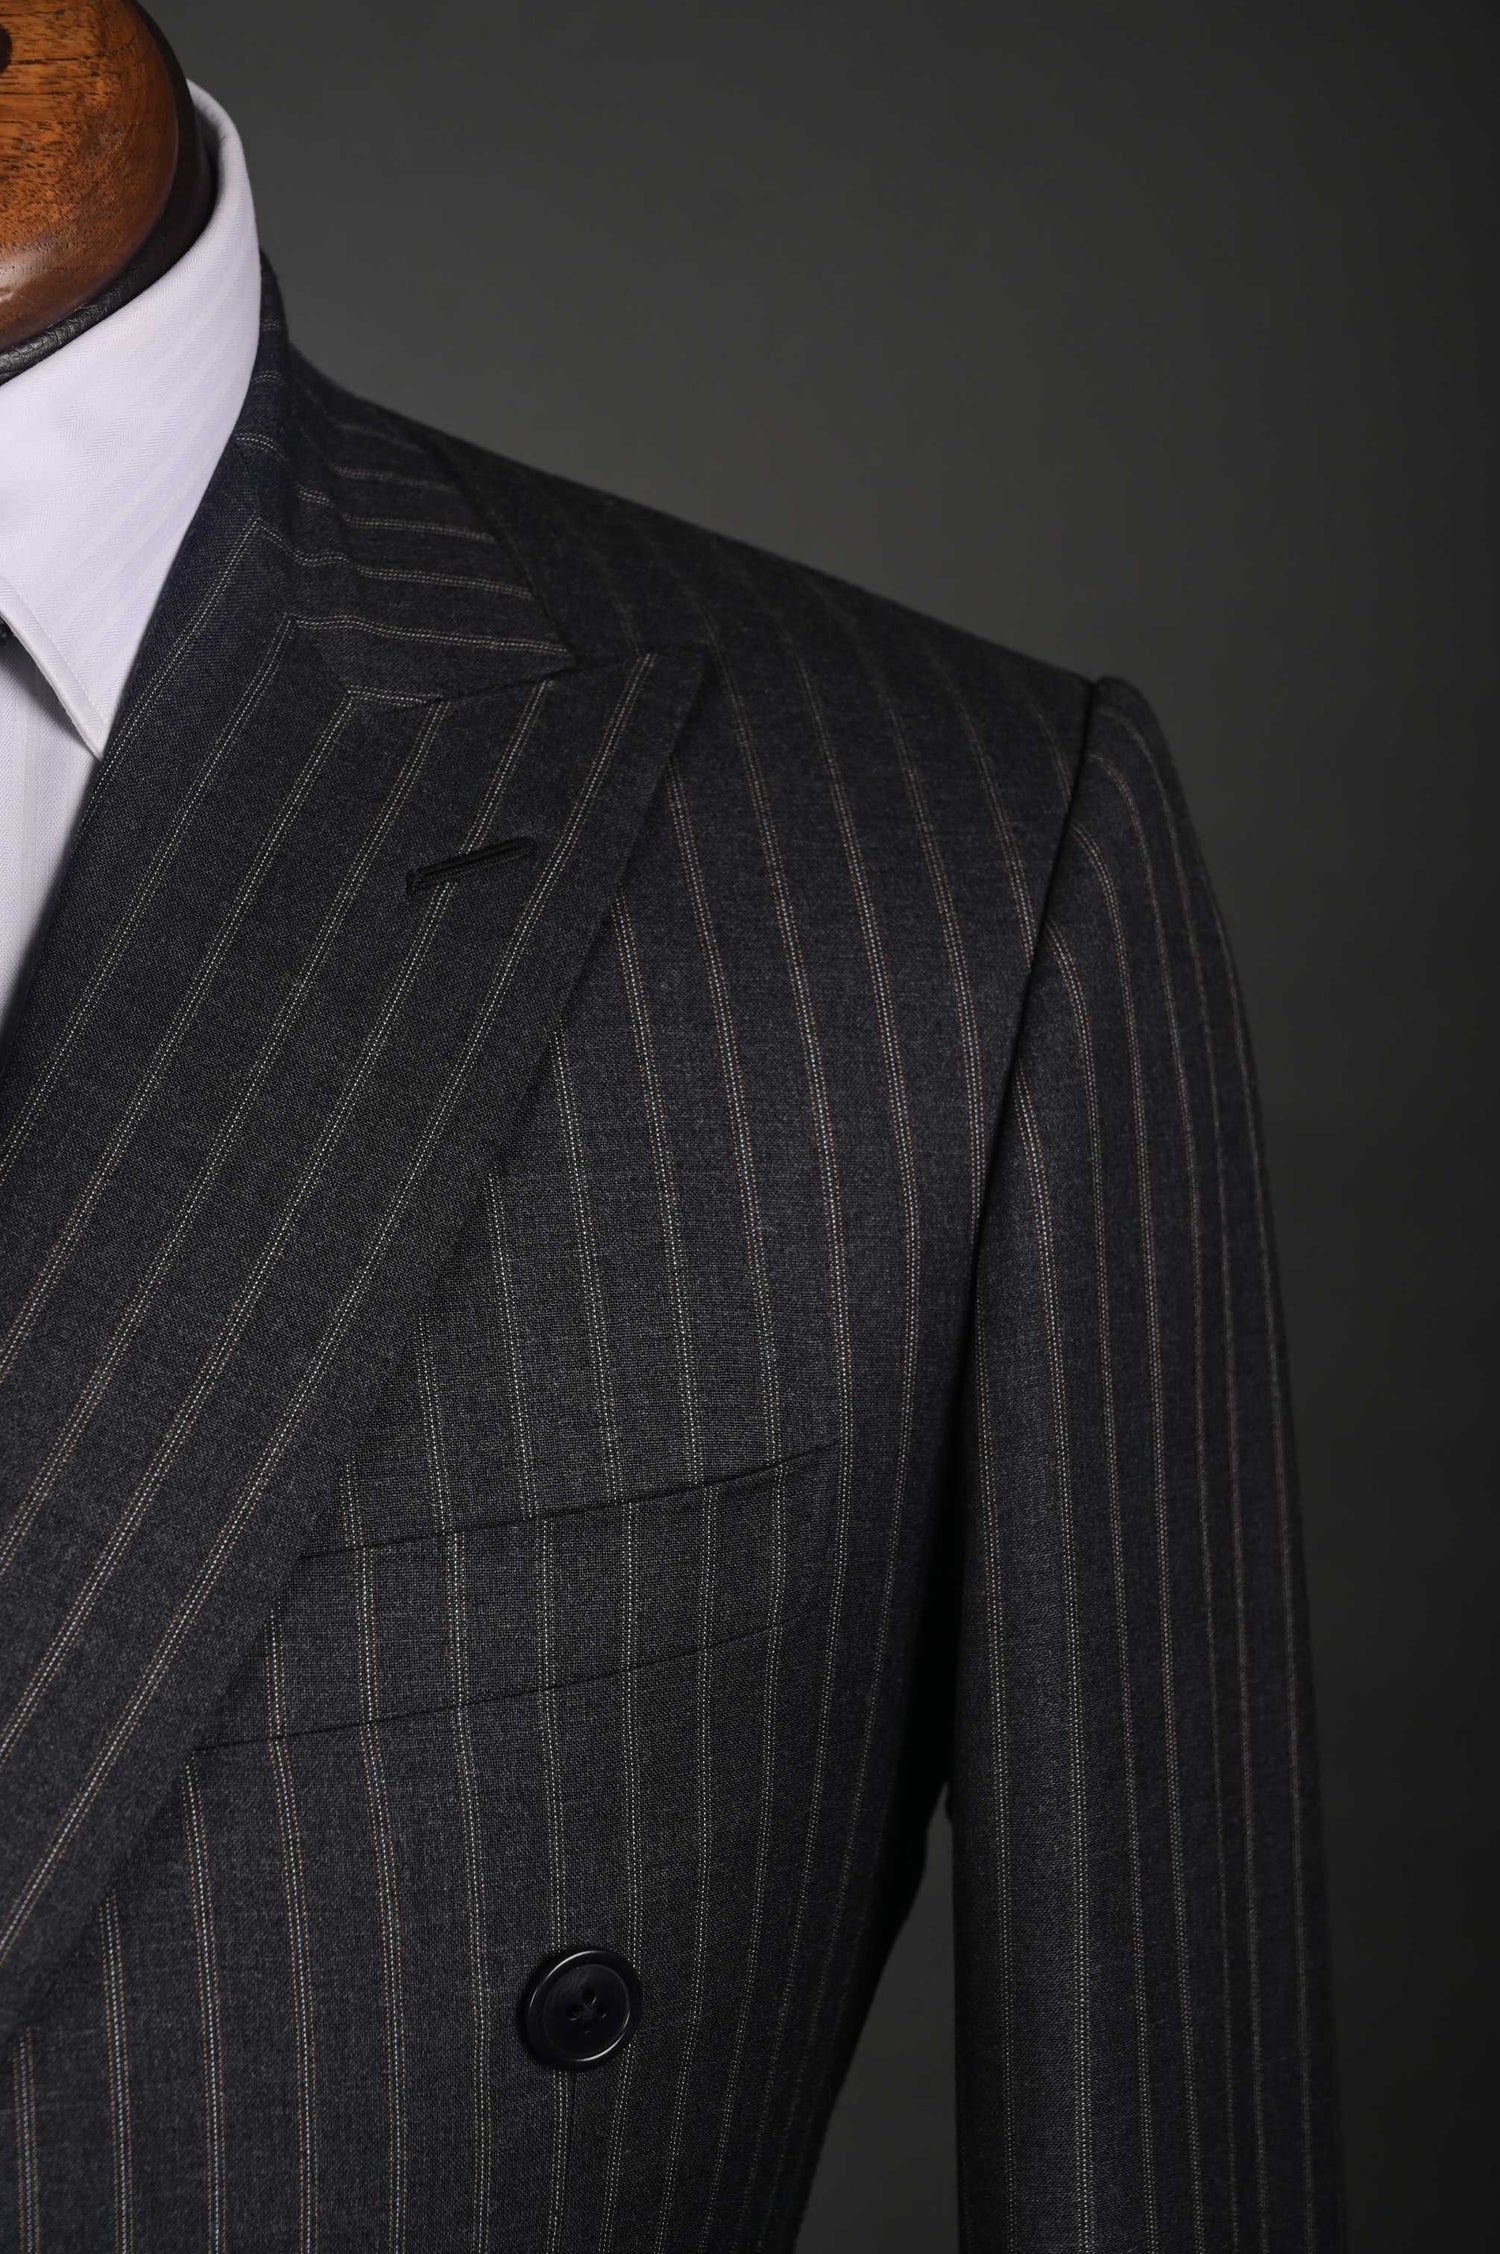 Canvassed Suit – Y&O-Bespoke